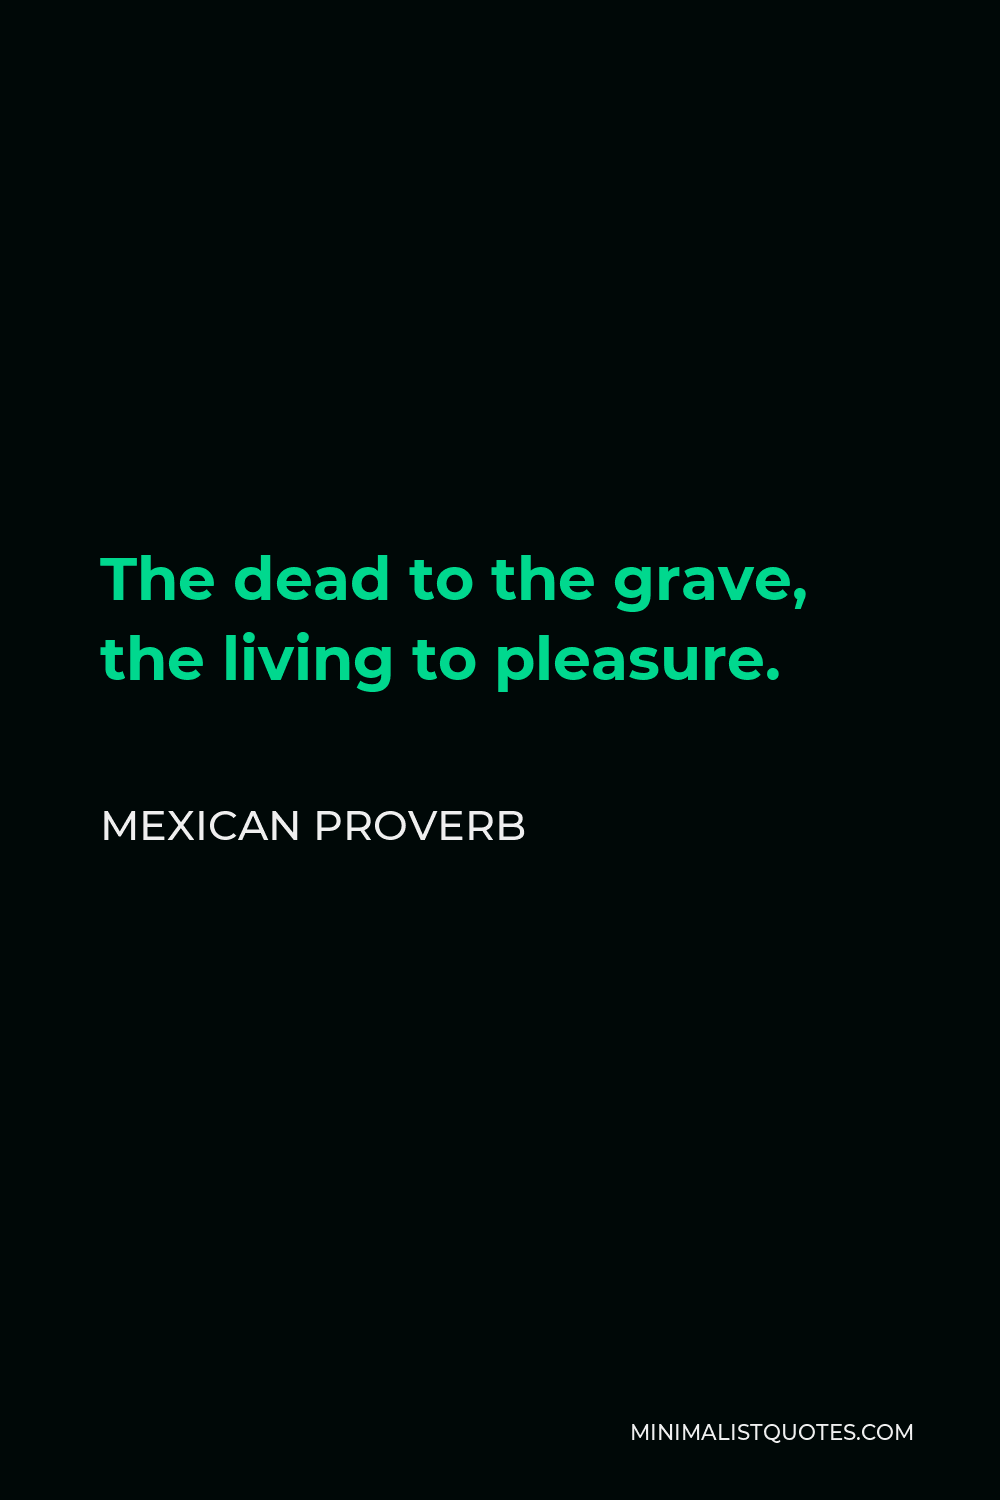 Mexican Proverb Quote - The dead to the grave, the living to pleasure.